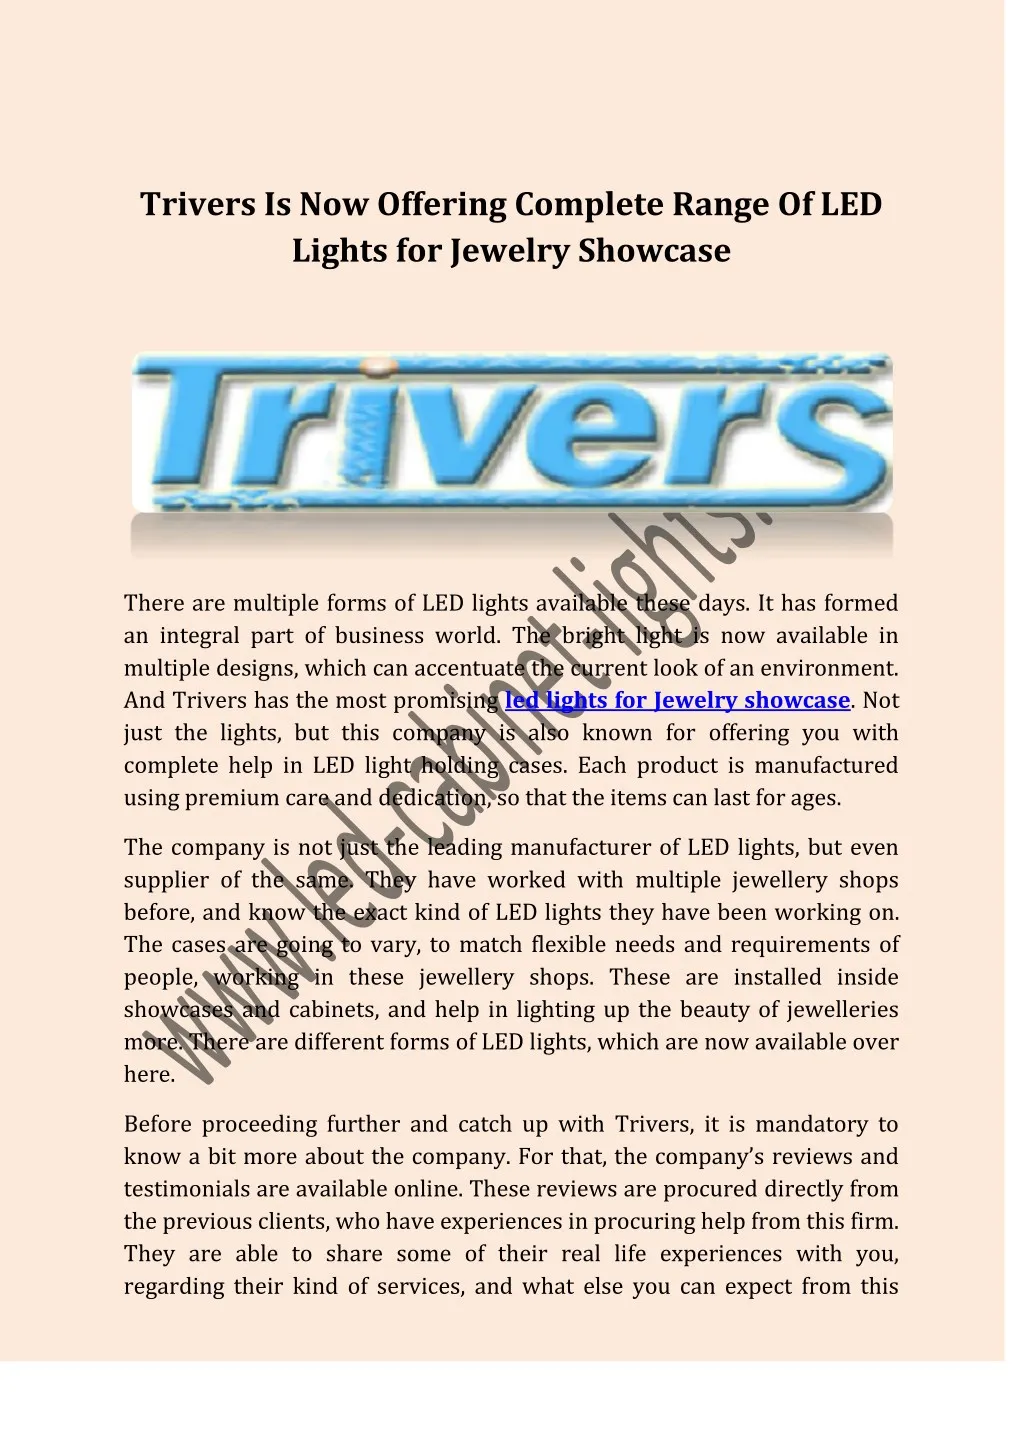 trivers is now offering complete range